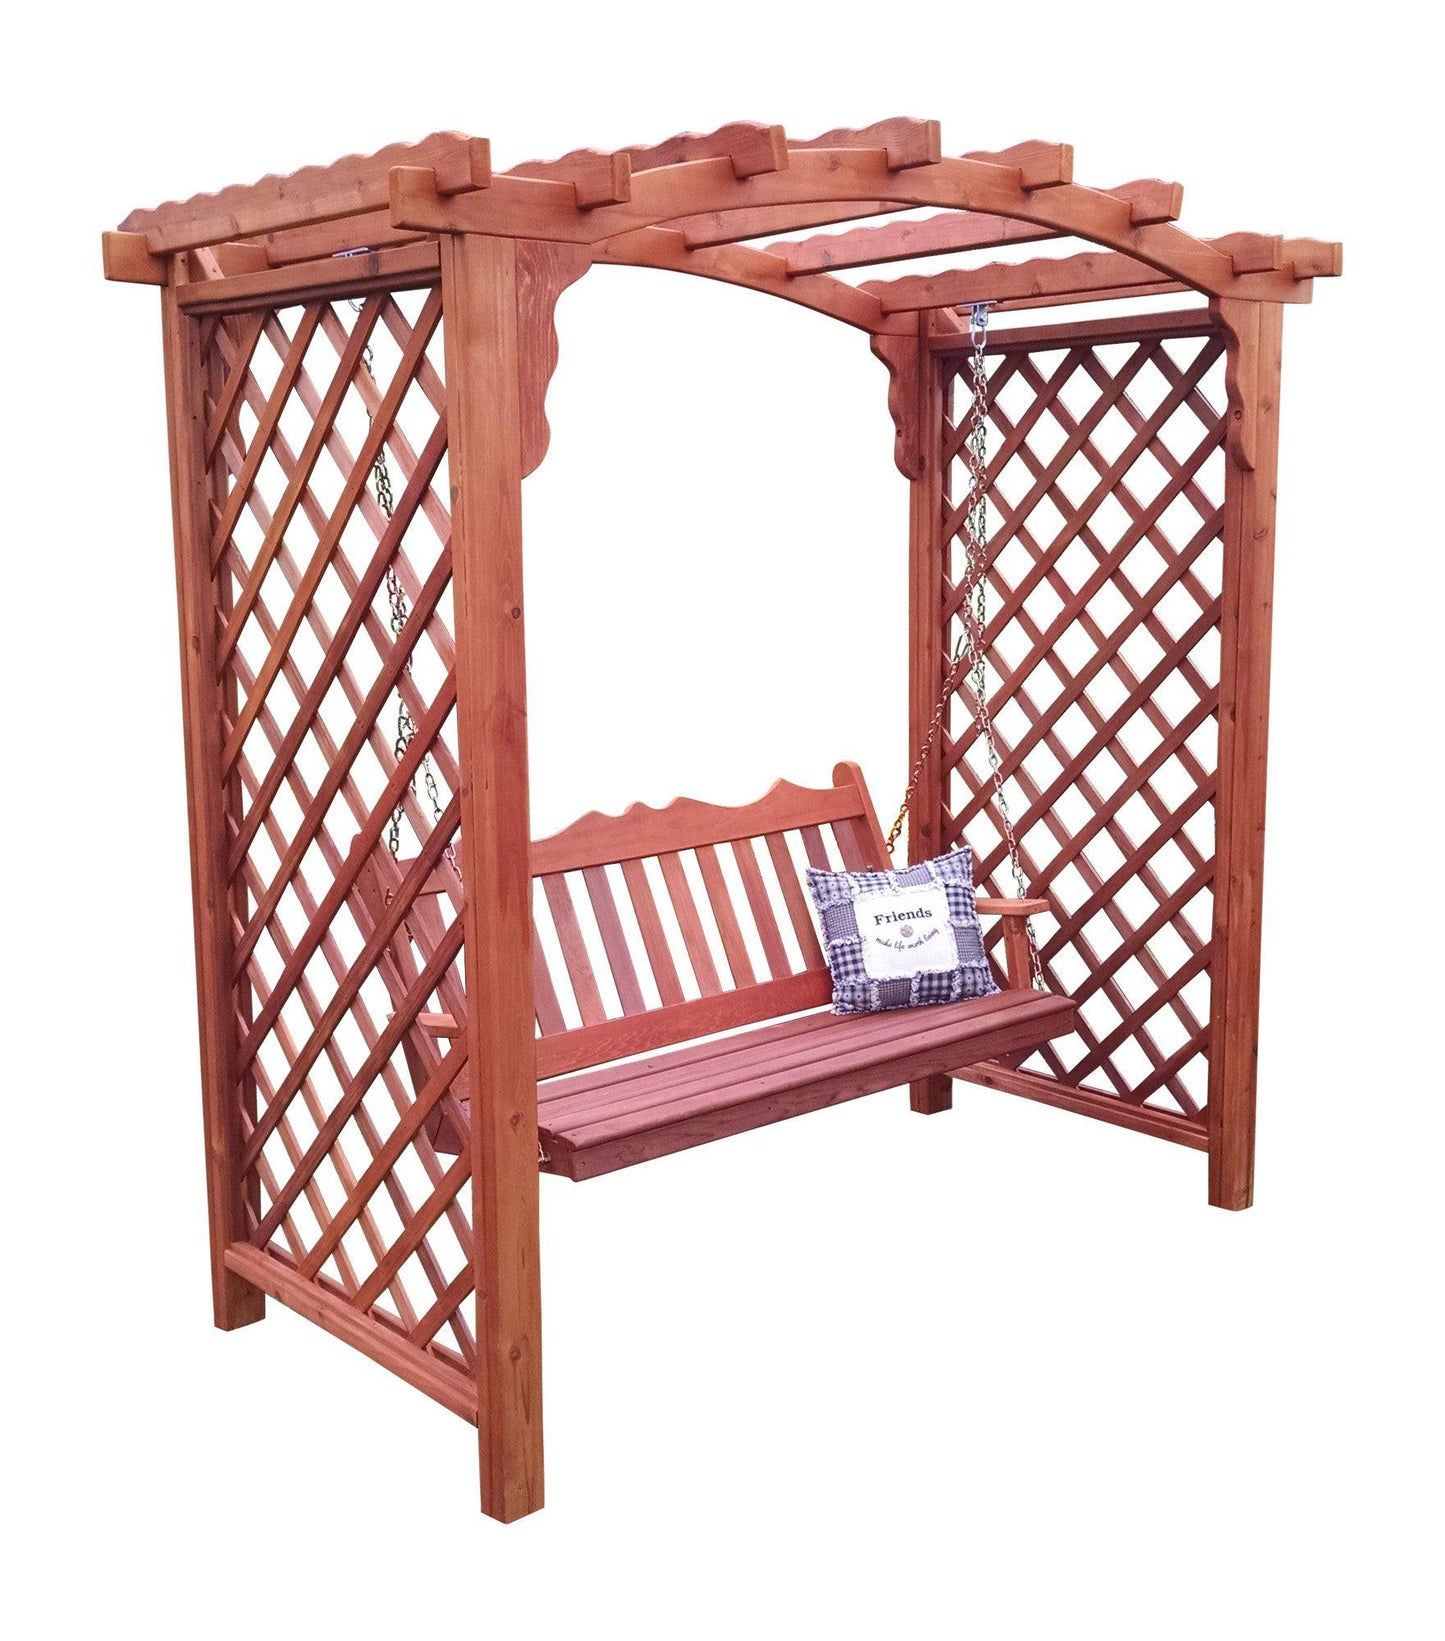 A&L Furniture Co. Western Red Cedar 5' Jamesport Arbor & Swing - LEAD TIME TO SHIP 2 WEEKS